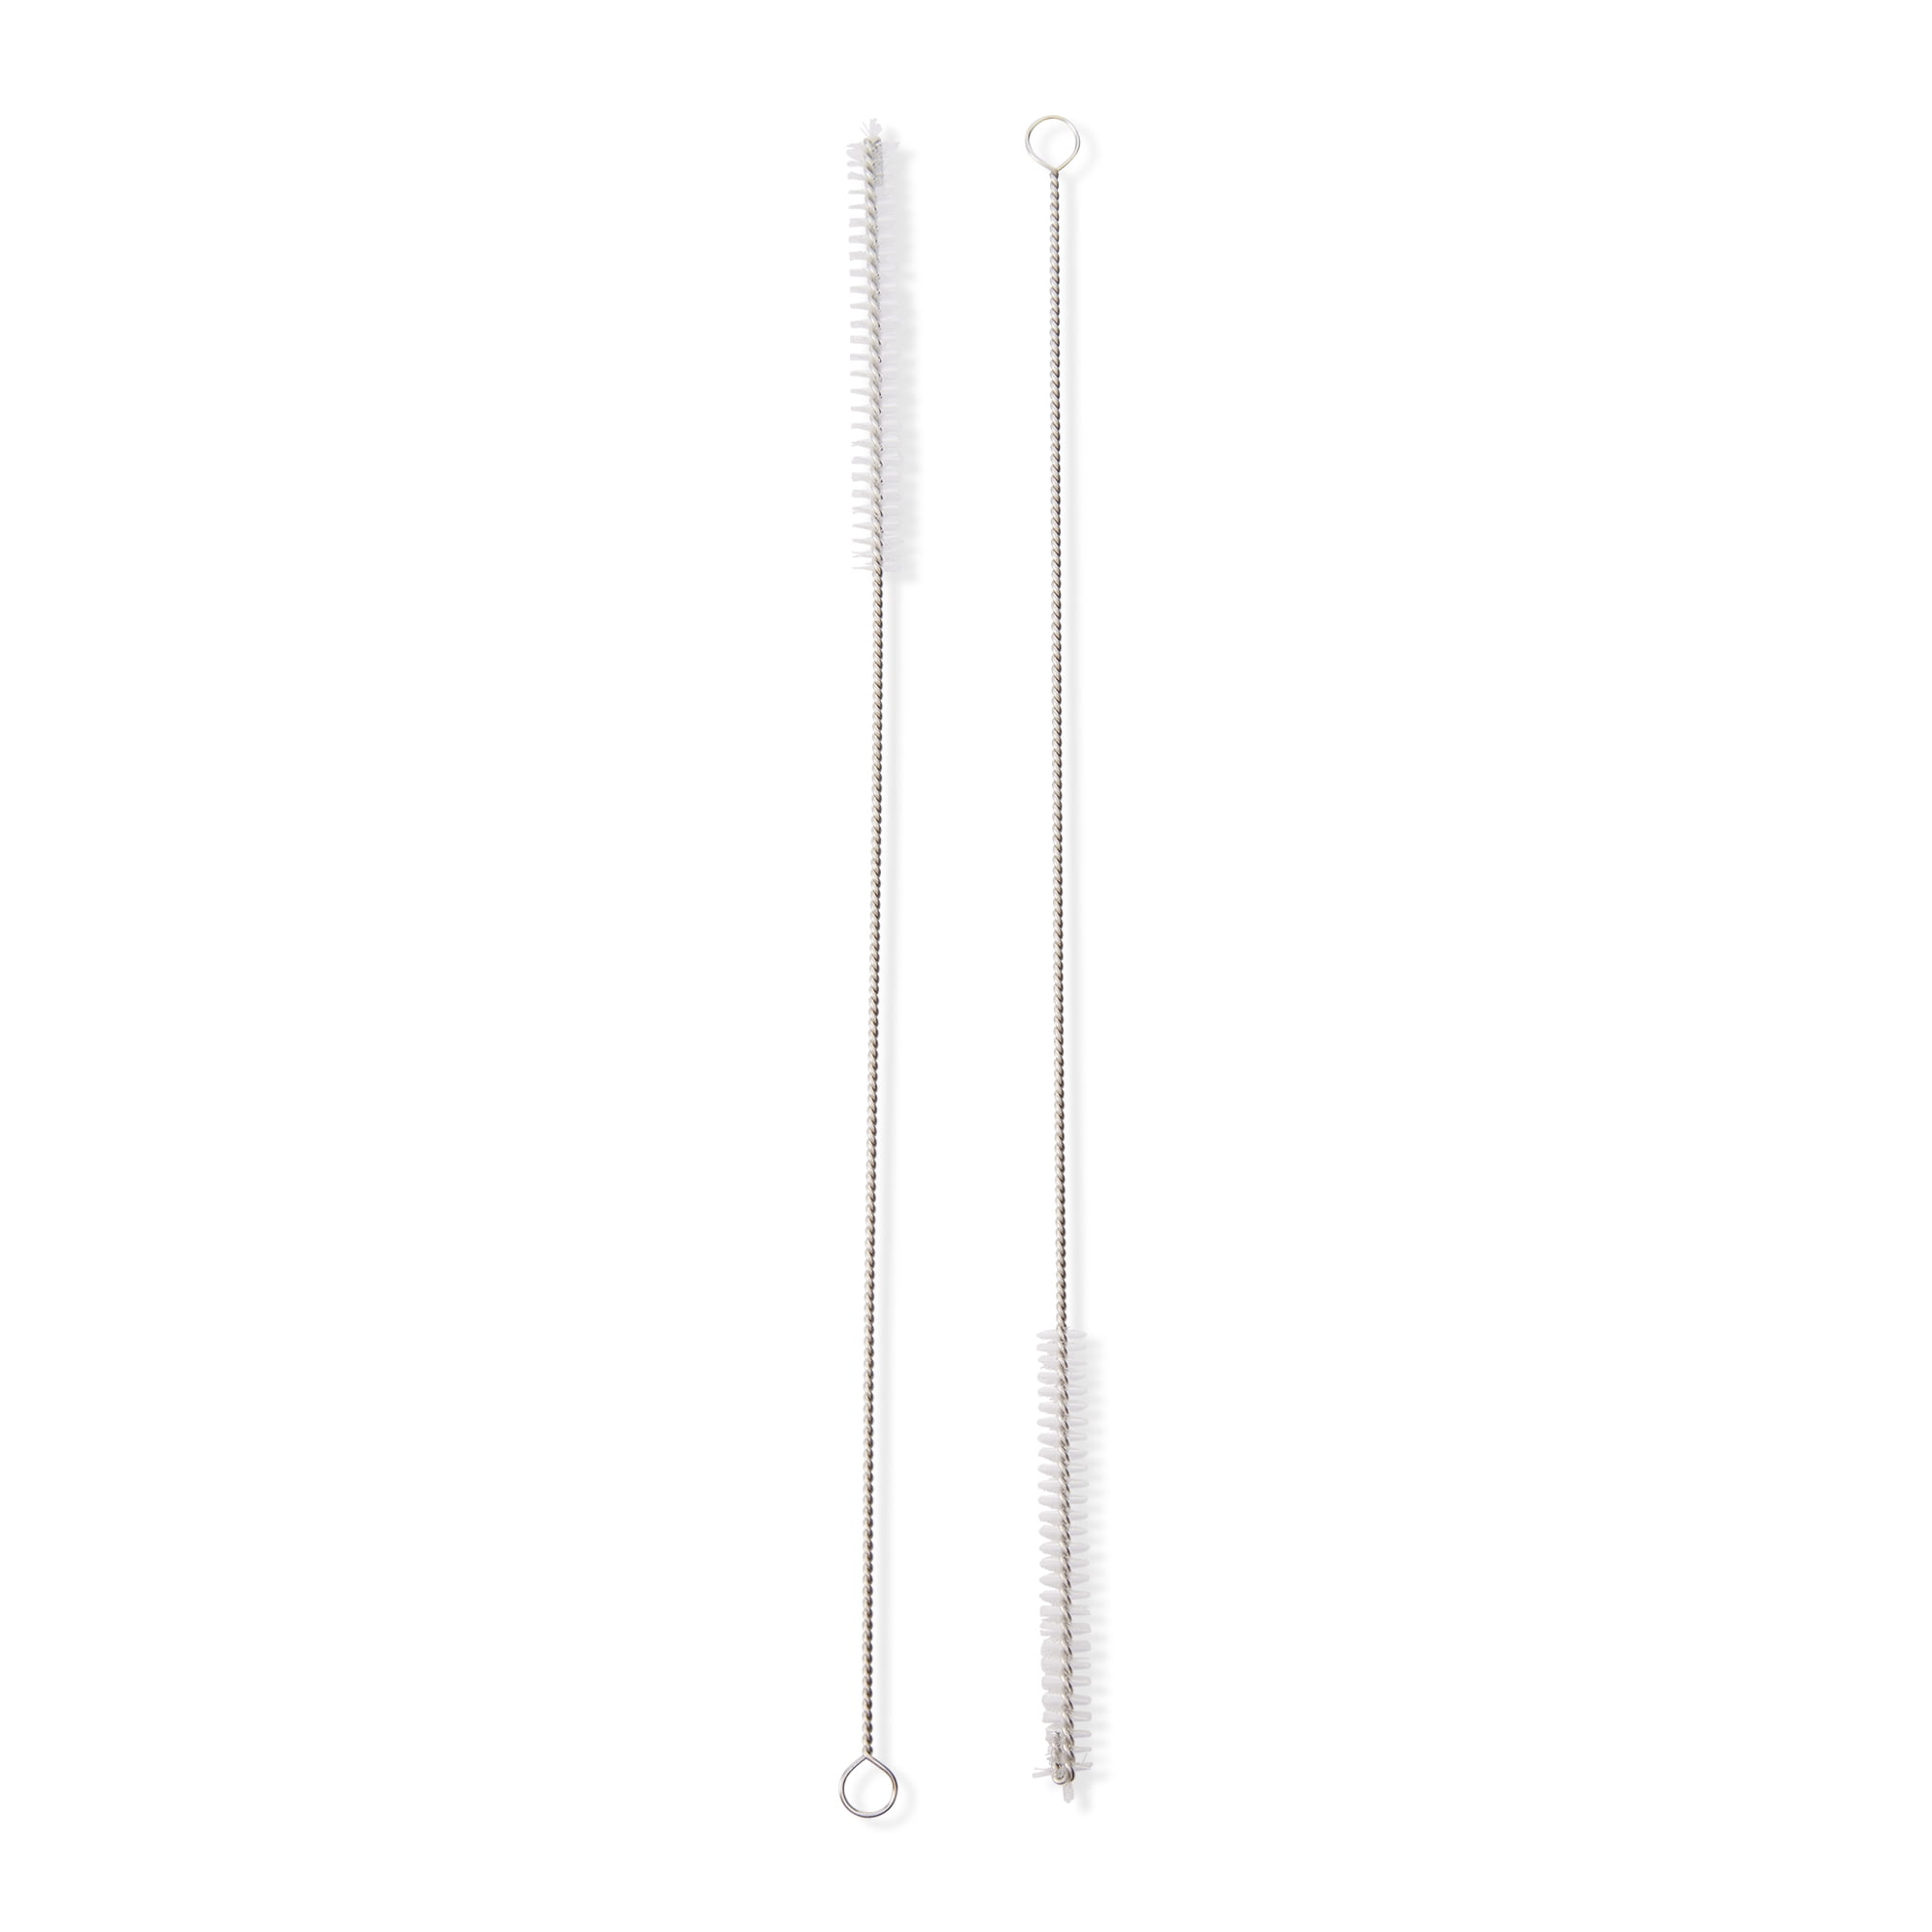 RSVP Drinking Straw Cleaning Brush 10 1/4" Long Set of 2 Wire Pipe Cleaner New 